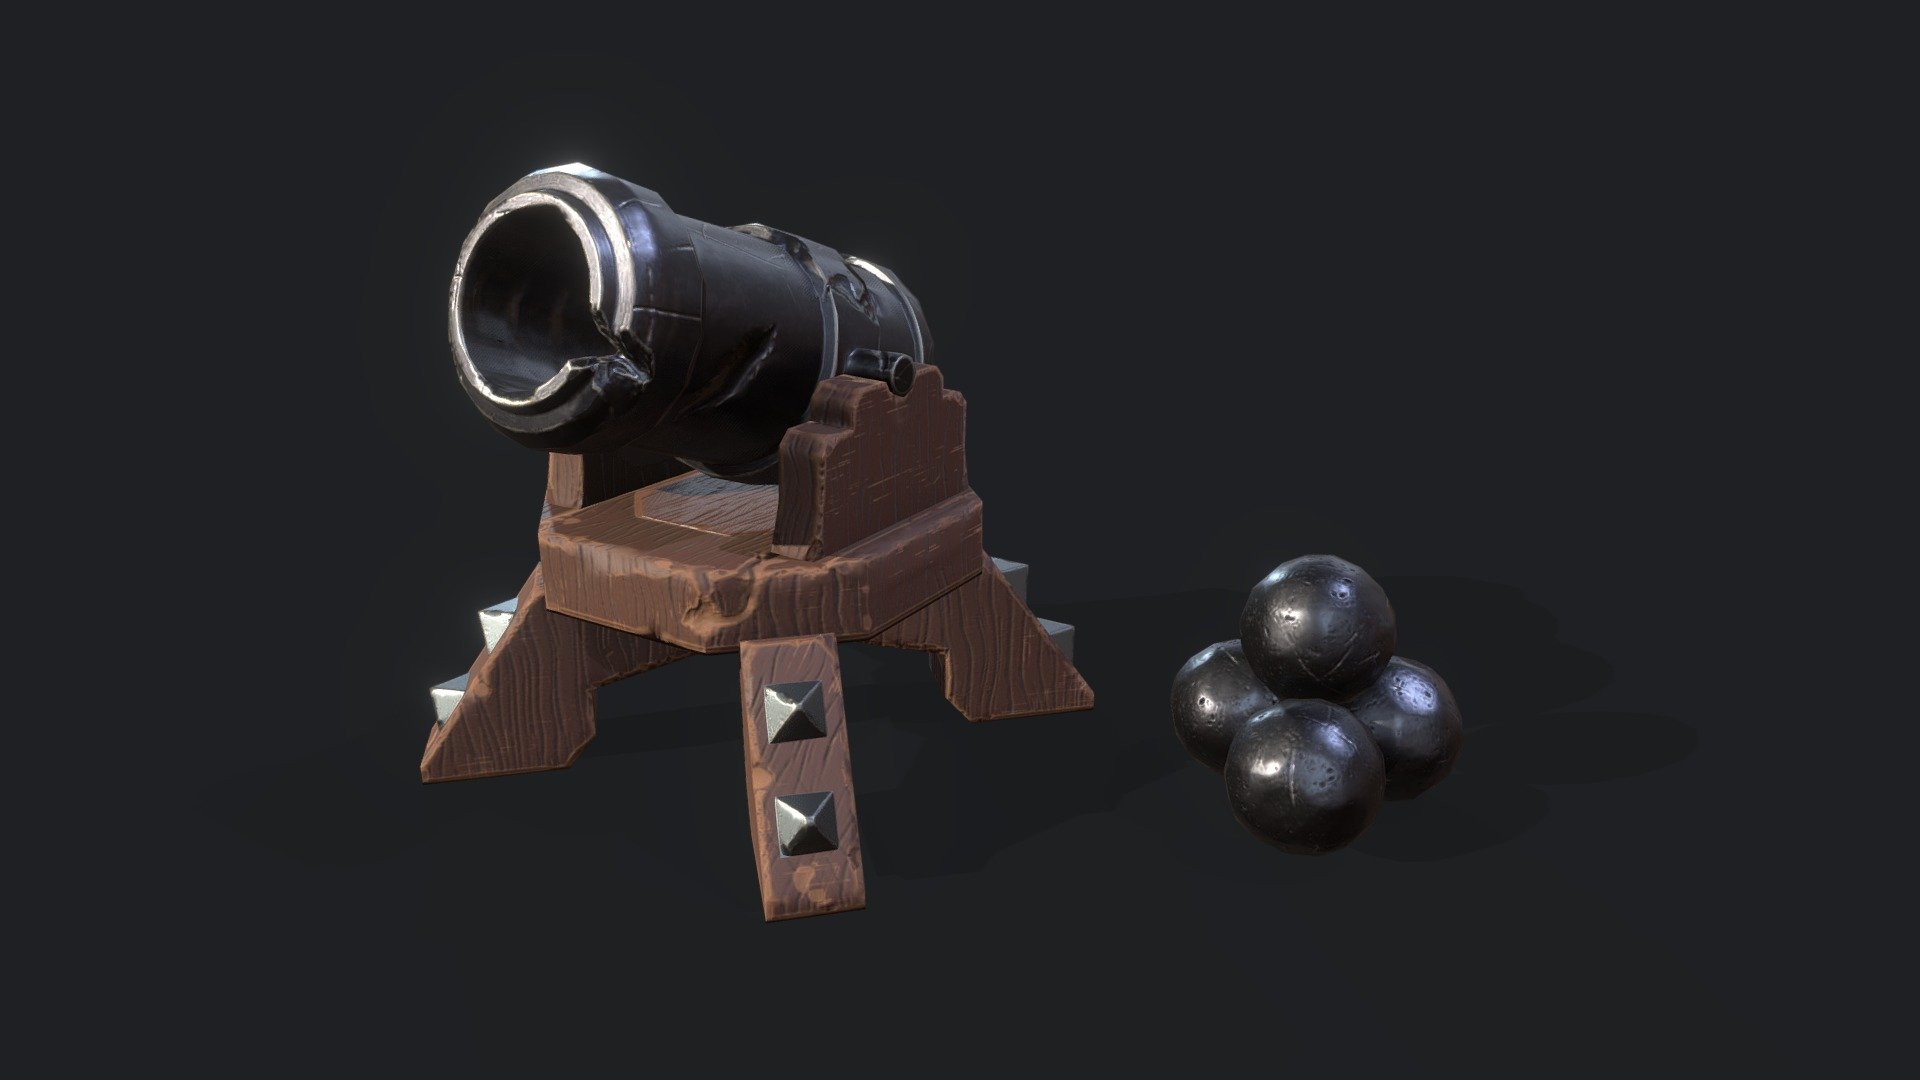 Stylized cannon low poly game ready 3d model. Accet include cannon and cannonball. It Have one texure set PBR metalic/roughness, 2048x2048px.

Texture set:




Base color 

Roughness

Metallic

Normal

Ambient Occlusion

Get model:



- CG Trader

- TurboSquid - Stylized Cannon - 3D model by Alex.Latigun 3d model